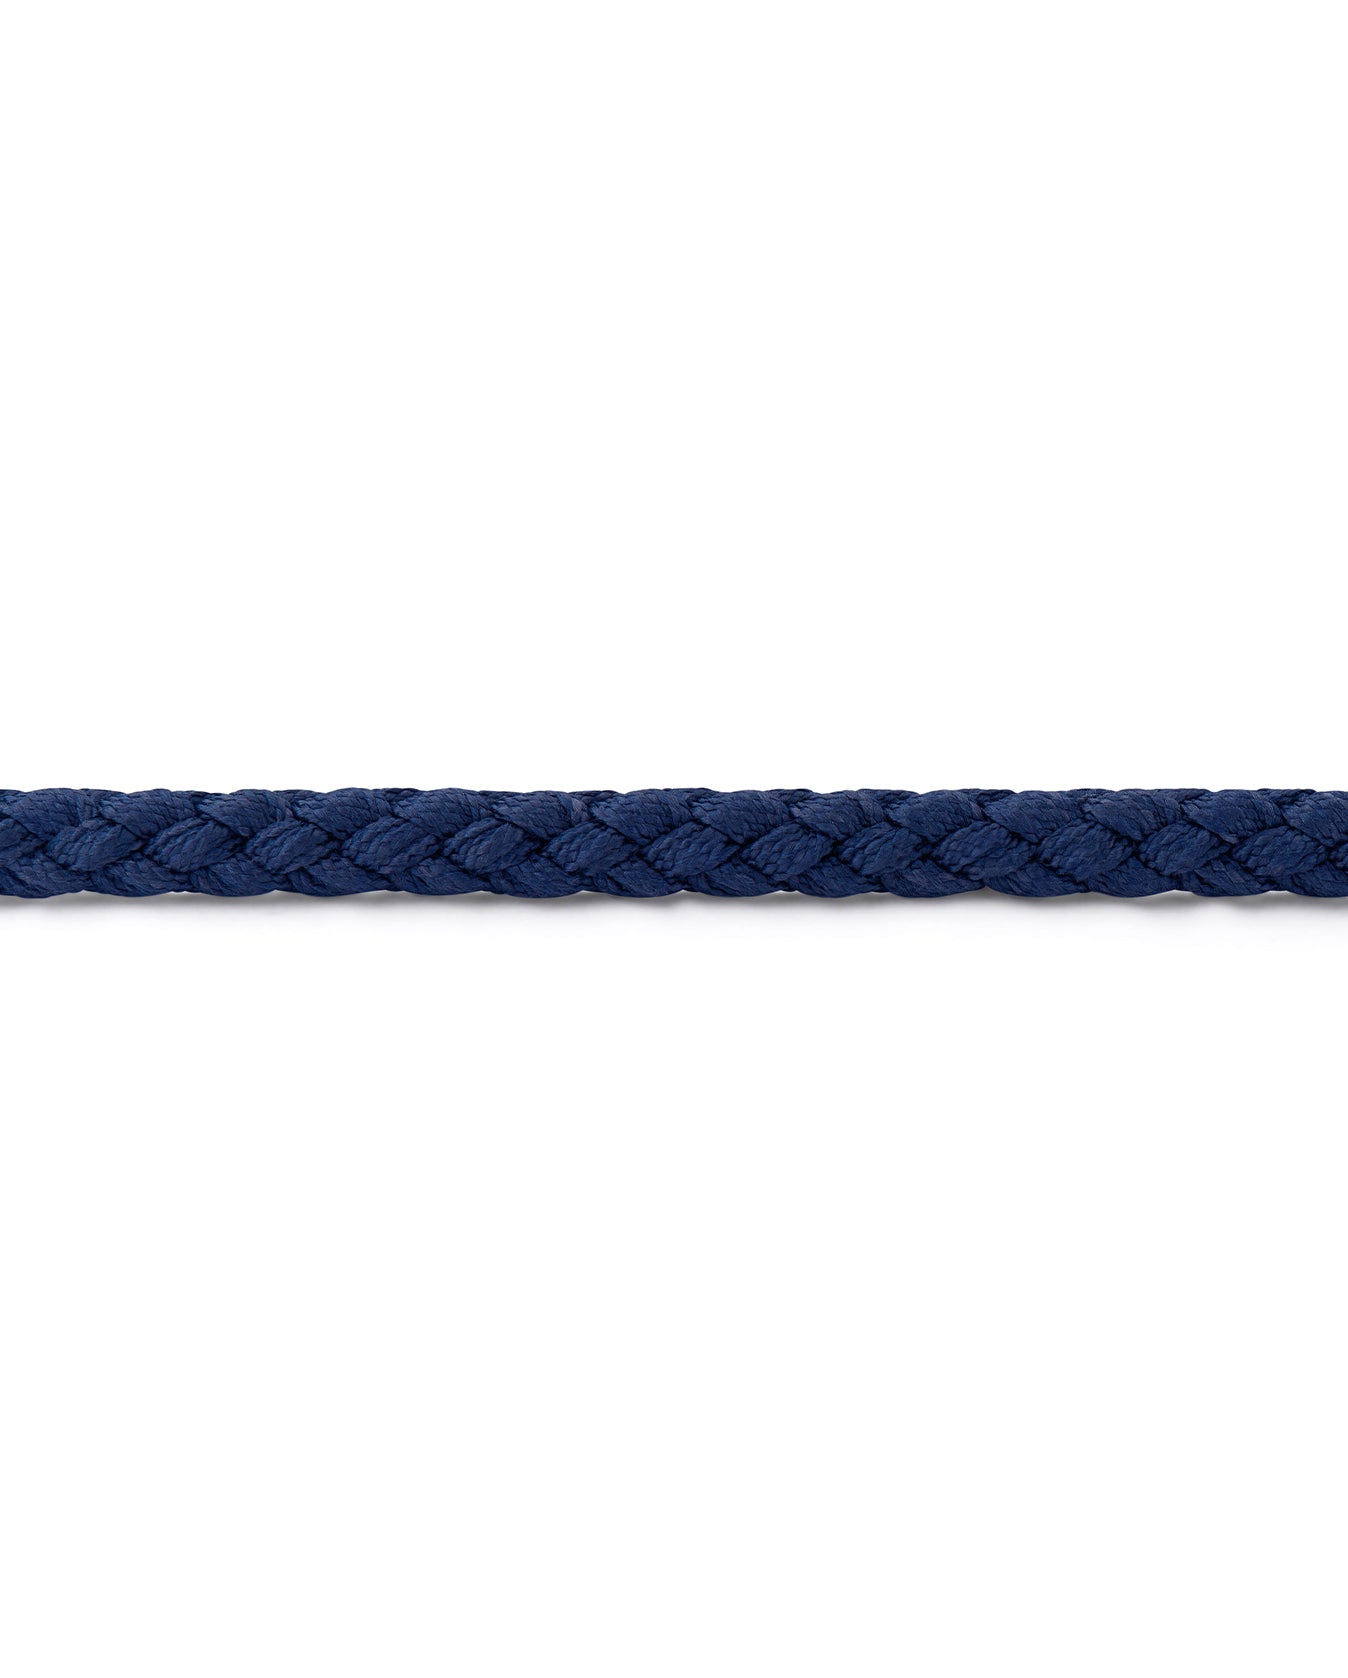 Mens Bracelet – Cord Brown and Navy